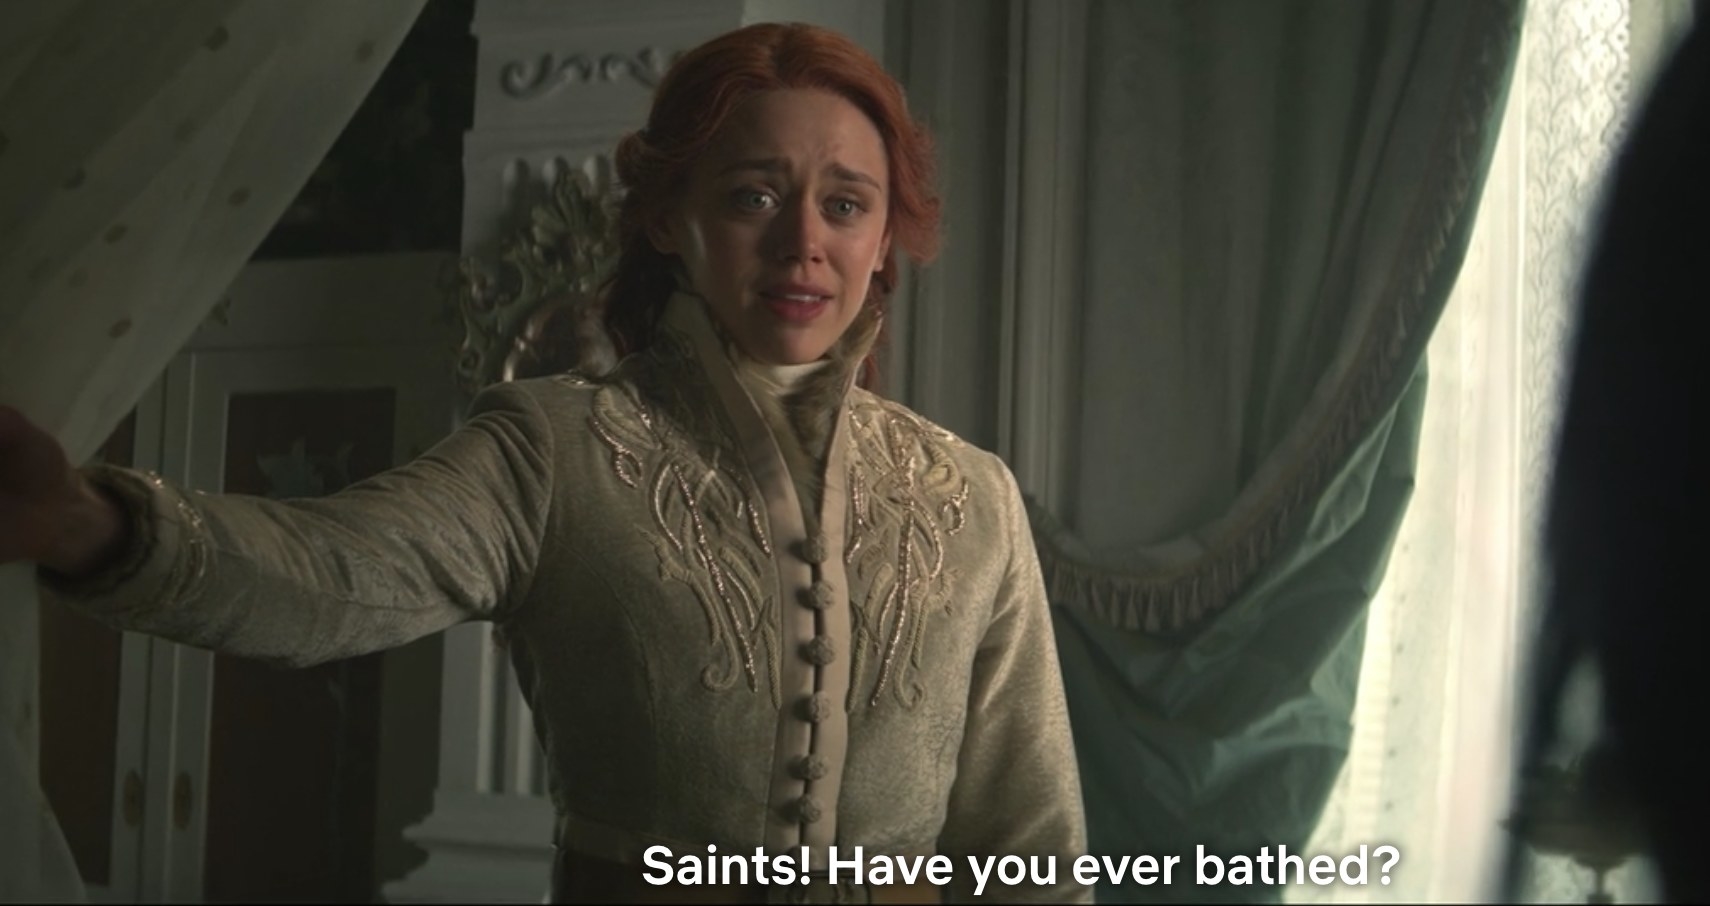 Daisy Head as Genya Safin saying &quot;Saints! Have you ever bathed?&quot;